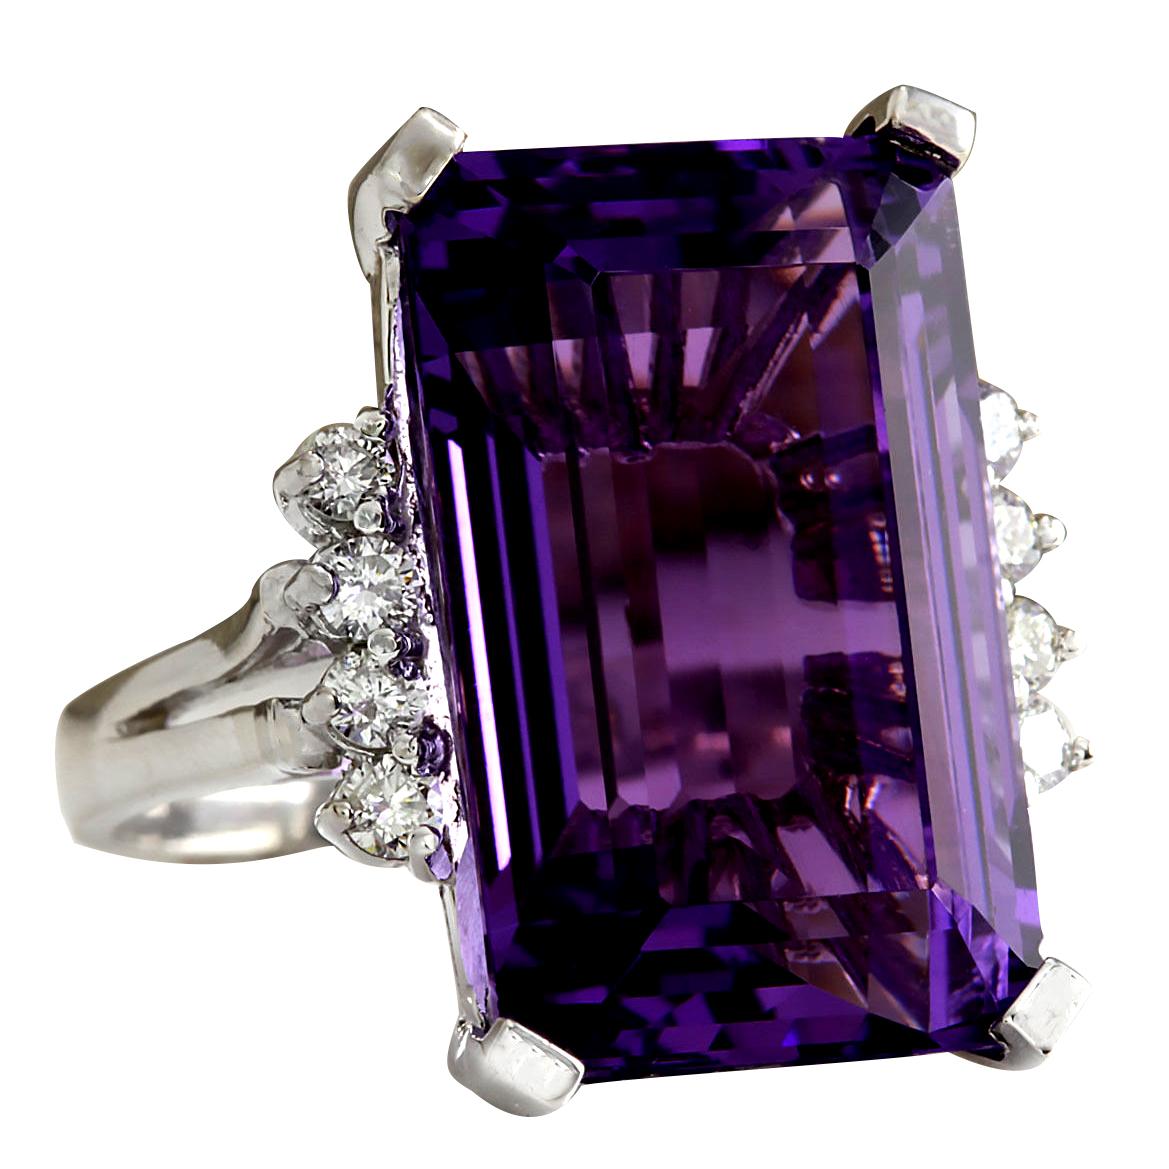 Stamped: 18K White Gold
Total Ring Weight: 7.0 Grams
Ring Length: N/A
Ring Width: N/A
Gemstone Weight: Total Natural Amethyst Weight is 20.55 Carat (Measures: 20.45x13.16 mm)
Color: Purple
Diamond Weight: Total Natural Diamond Weight is 0.30